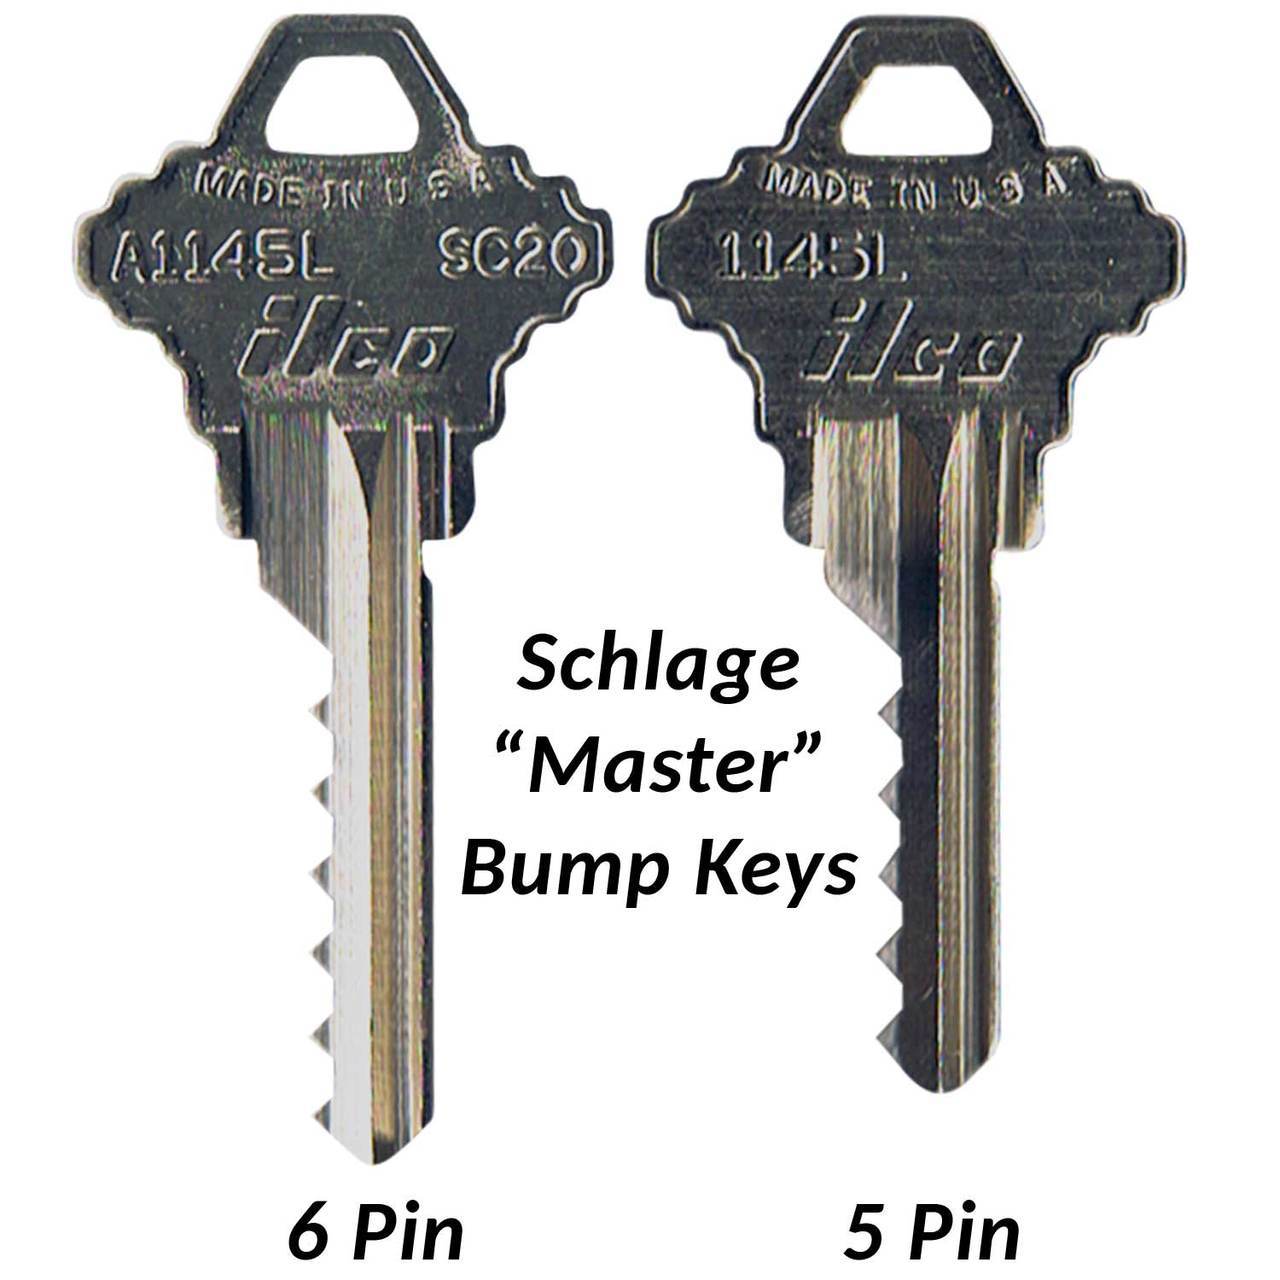 schlage-bump-keys-2-together-front-91928-1498538346-your-home